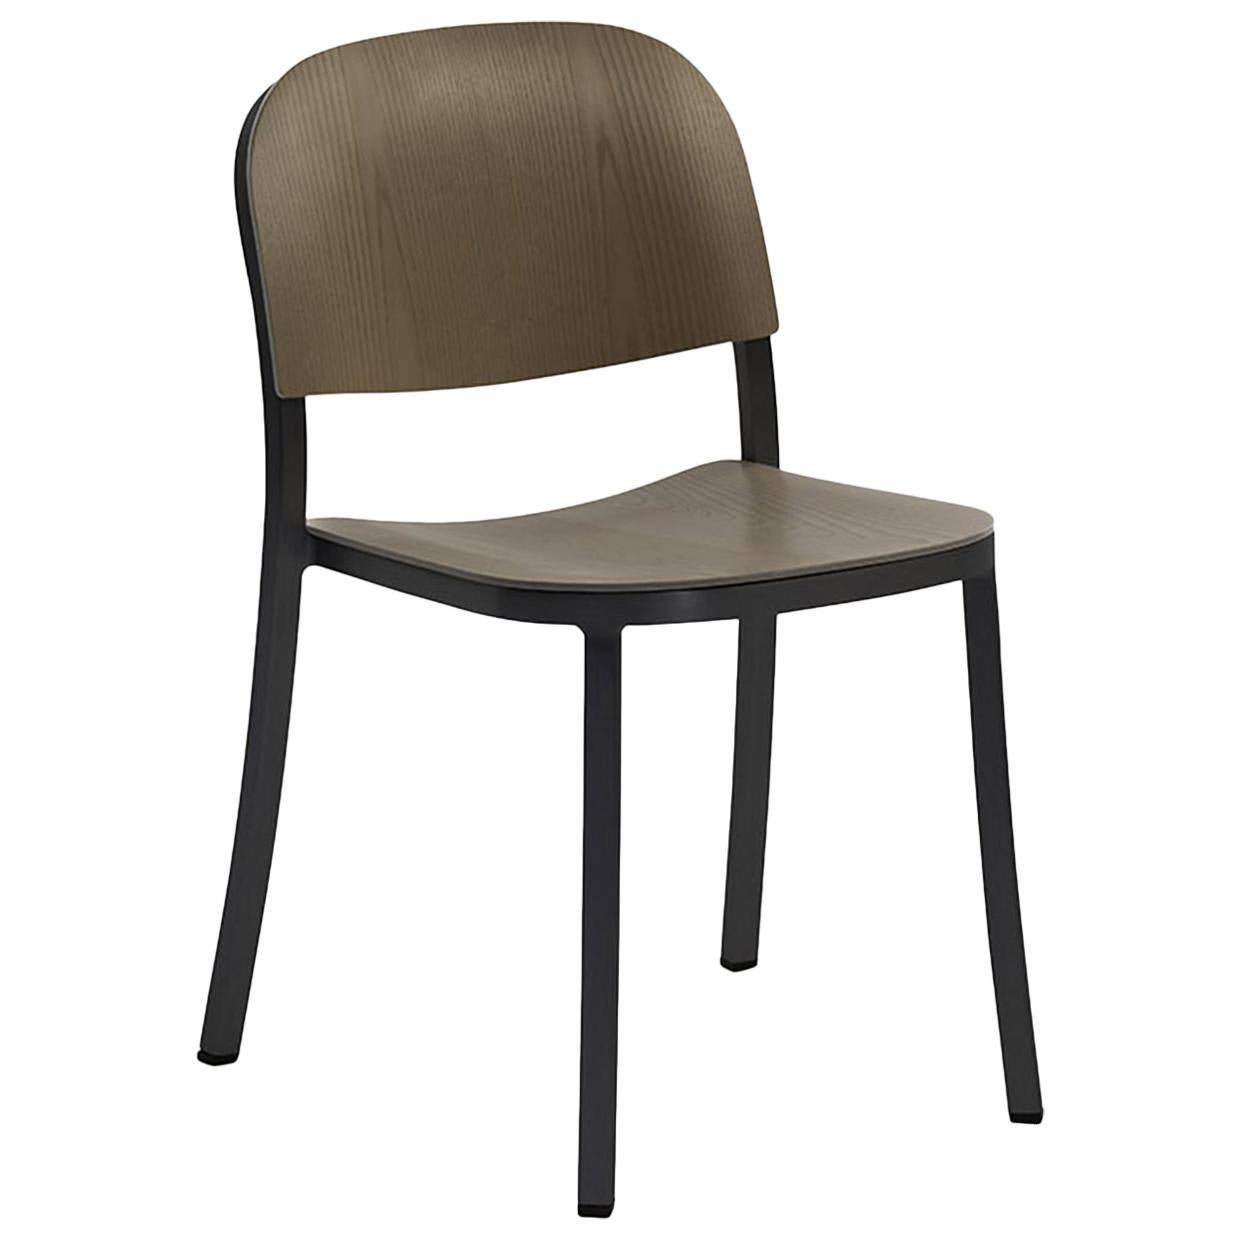 Emeco 1 Inch Stacking Chair in Dark Aluminum and Walnut by Jasper Morrison